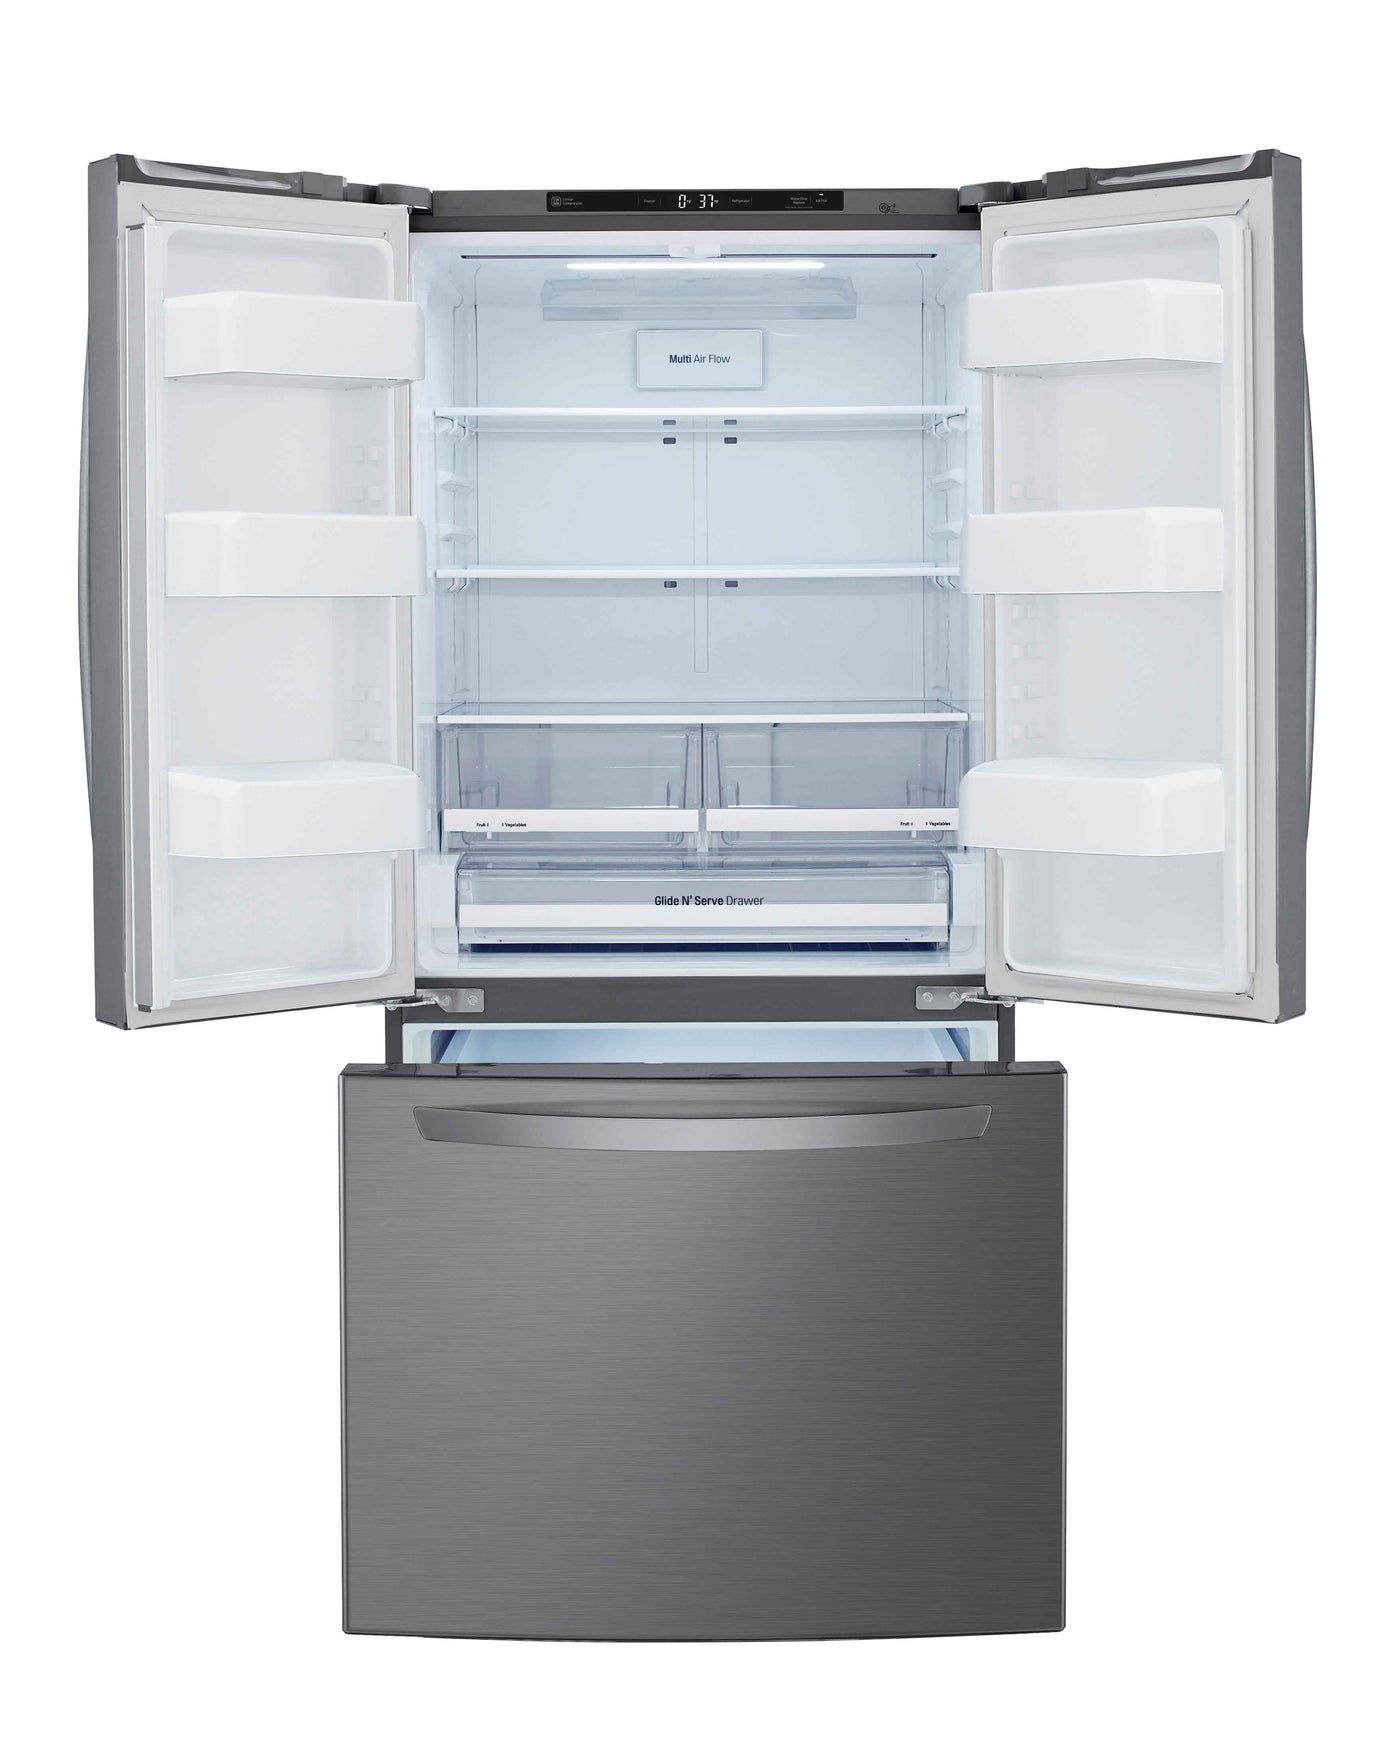 LG 33 in. 25 cu. ft. Platinum Silver French Door Refrigerator with Smart Cooling Plus System - LRFNS2503V